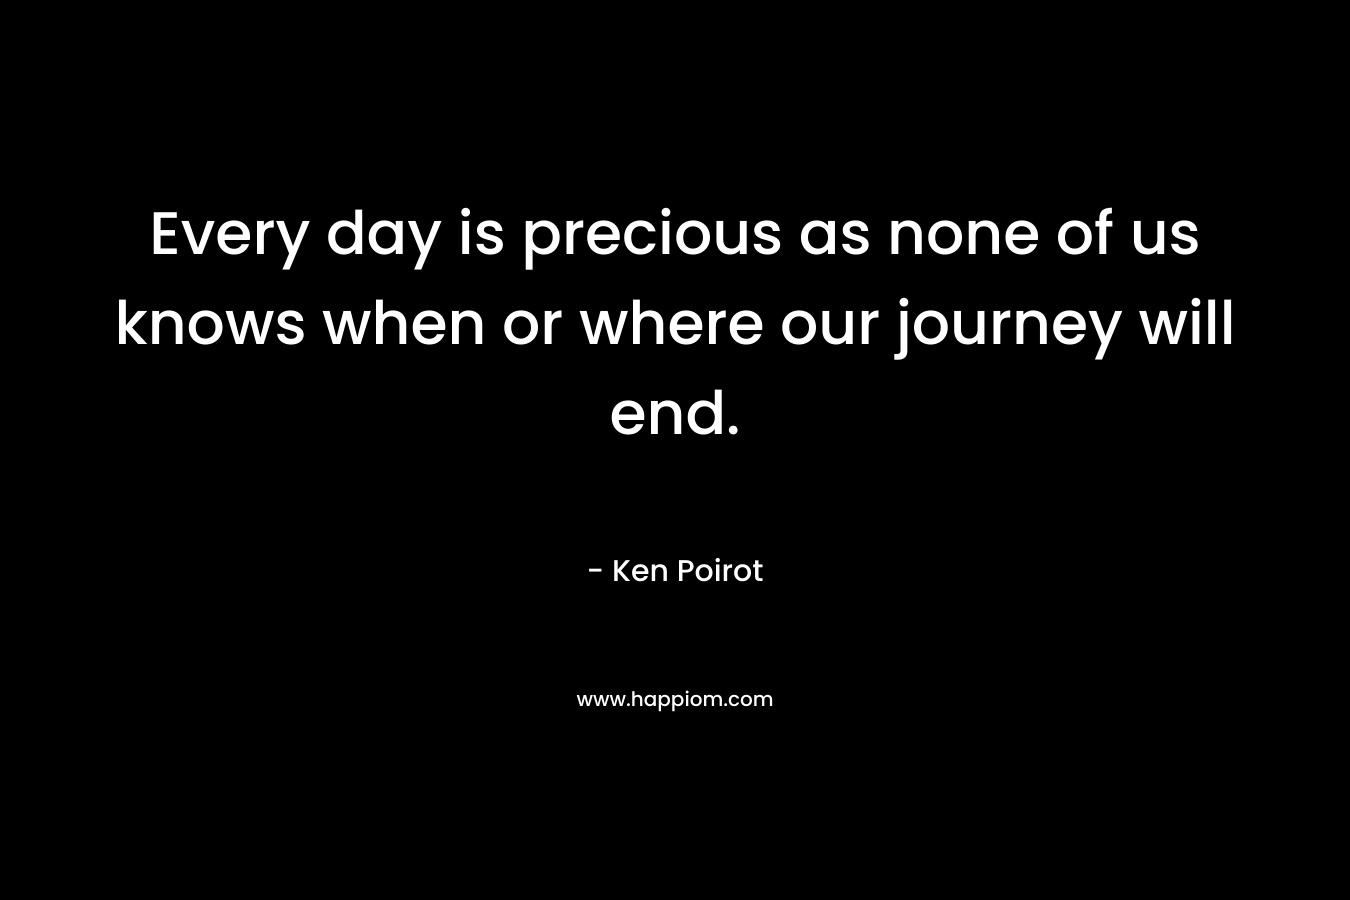 Every day is precious as none of us knows when or where our journey will end.